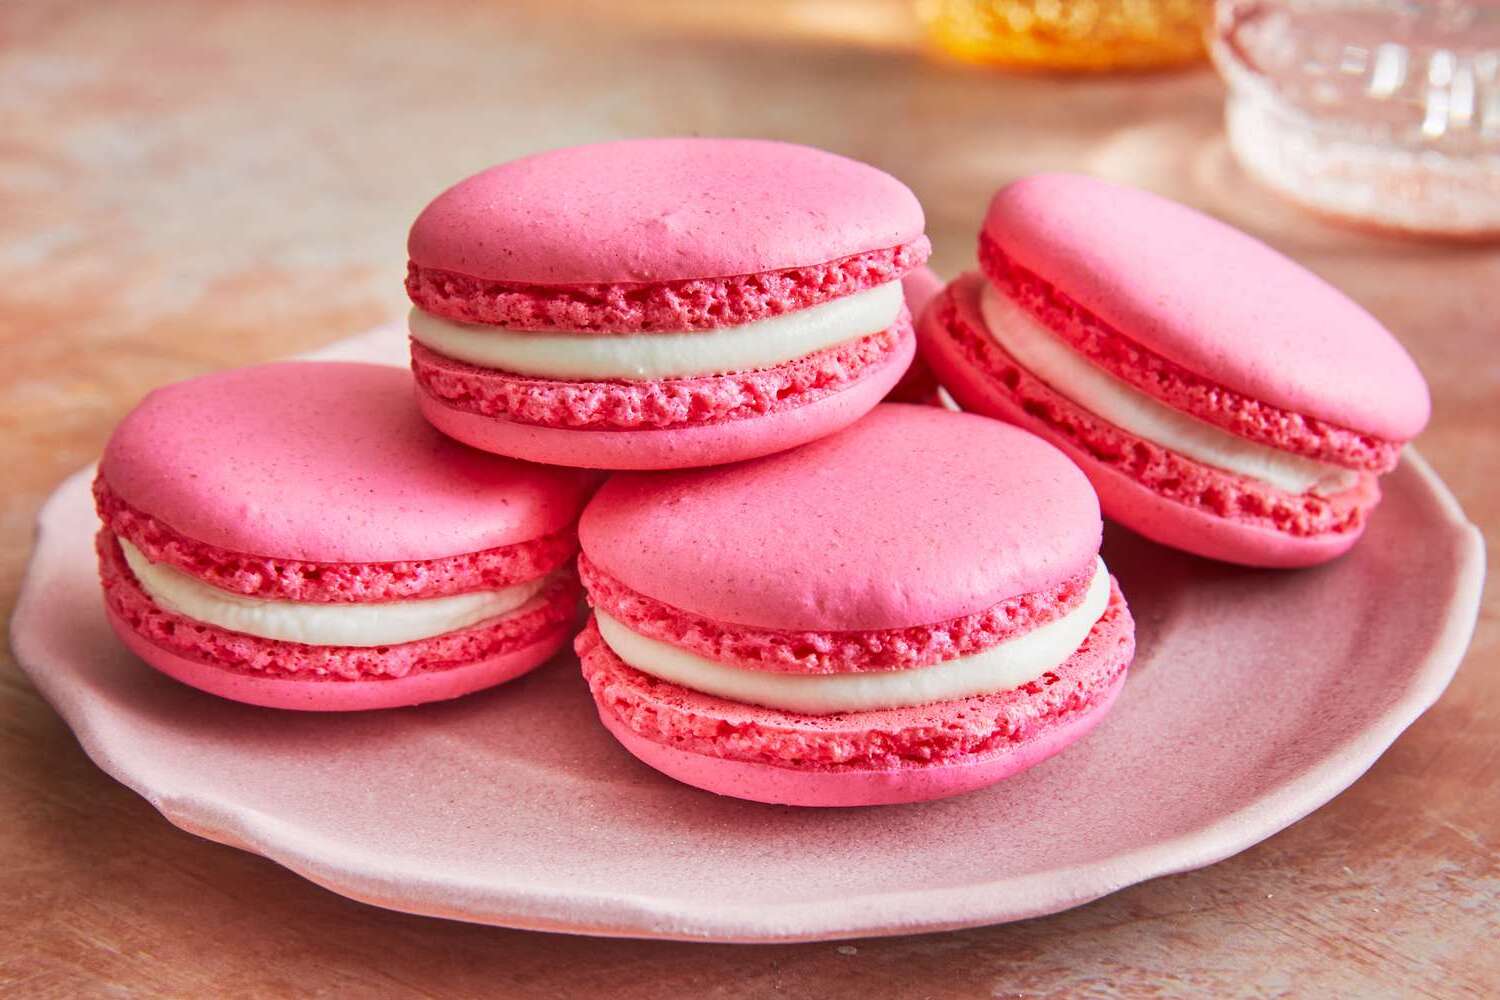 14-facts-about-national-macaroon-day-may-31st